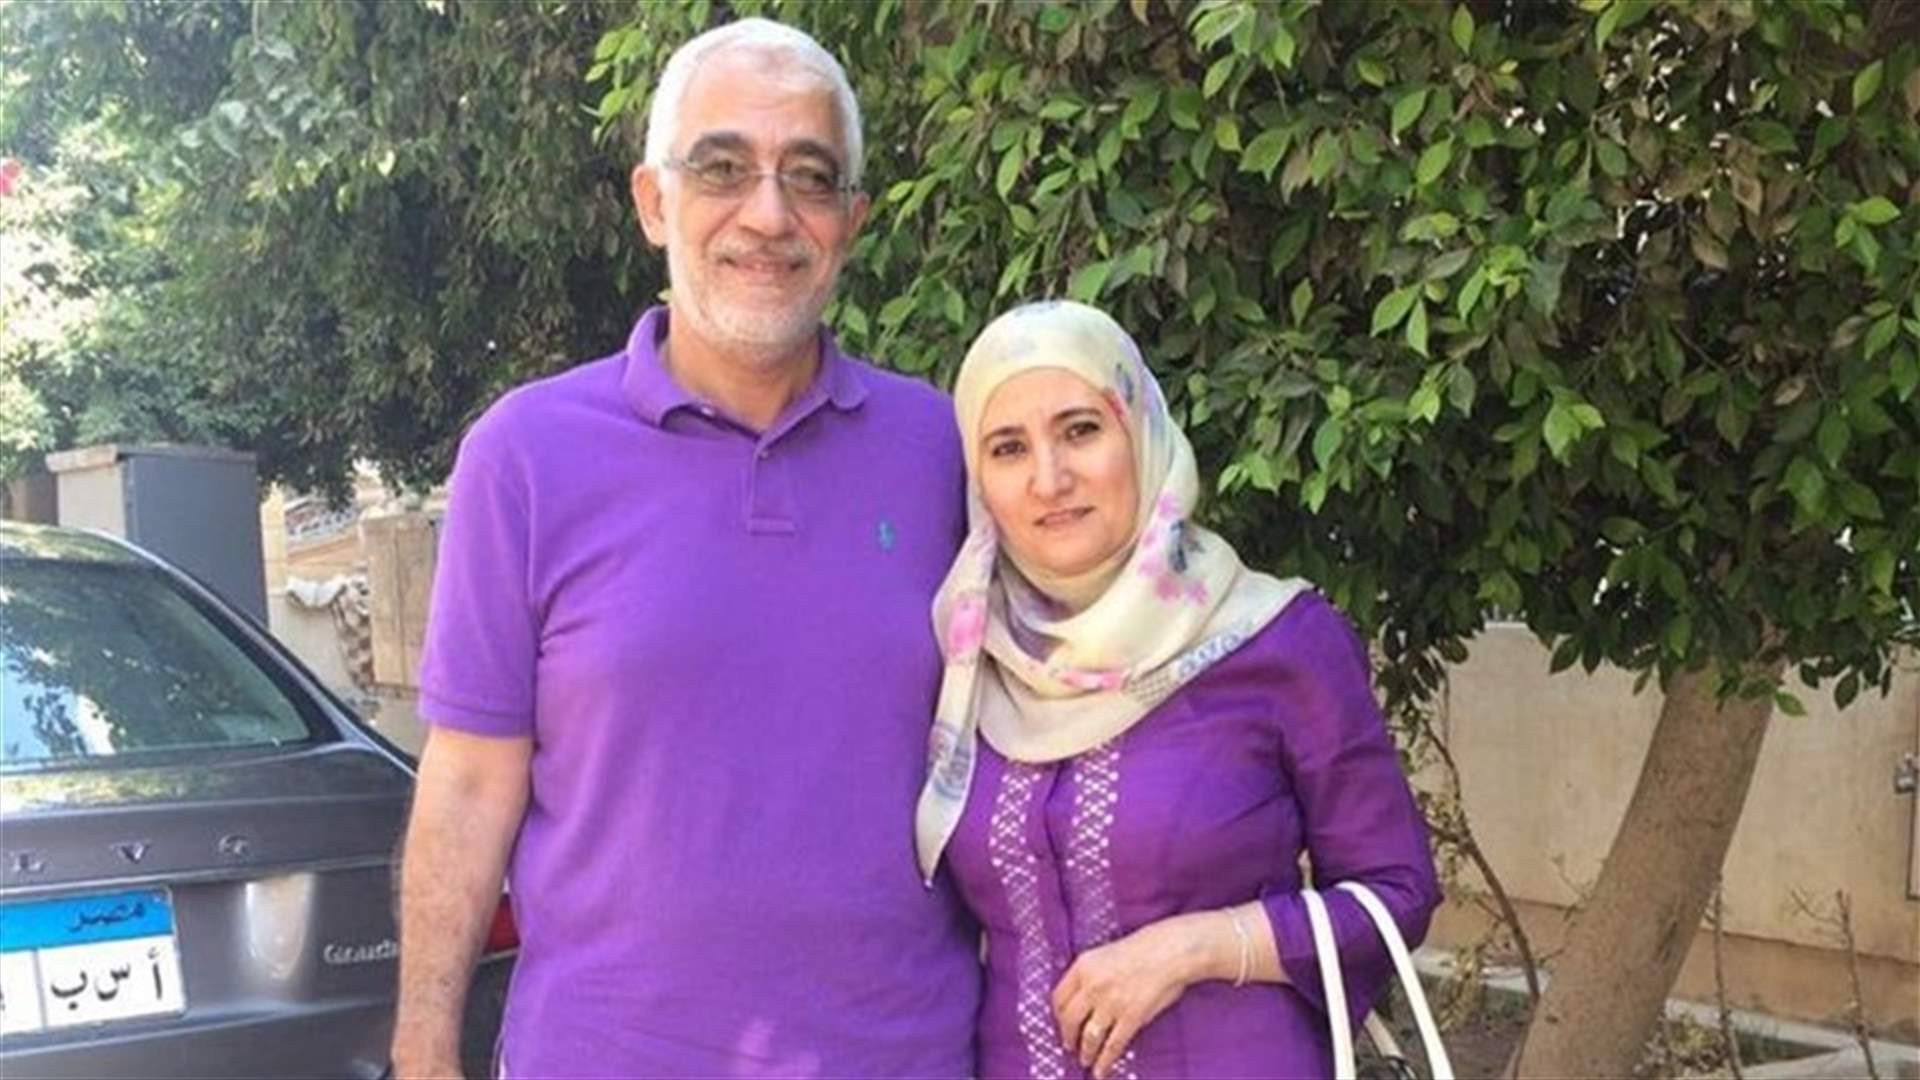 UN rights experts urge Egypt to free couple unlawfully detained